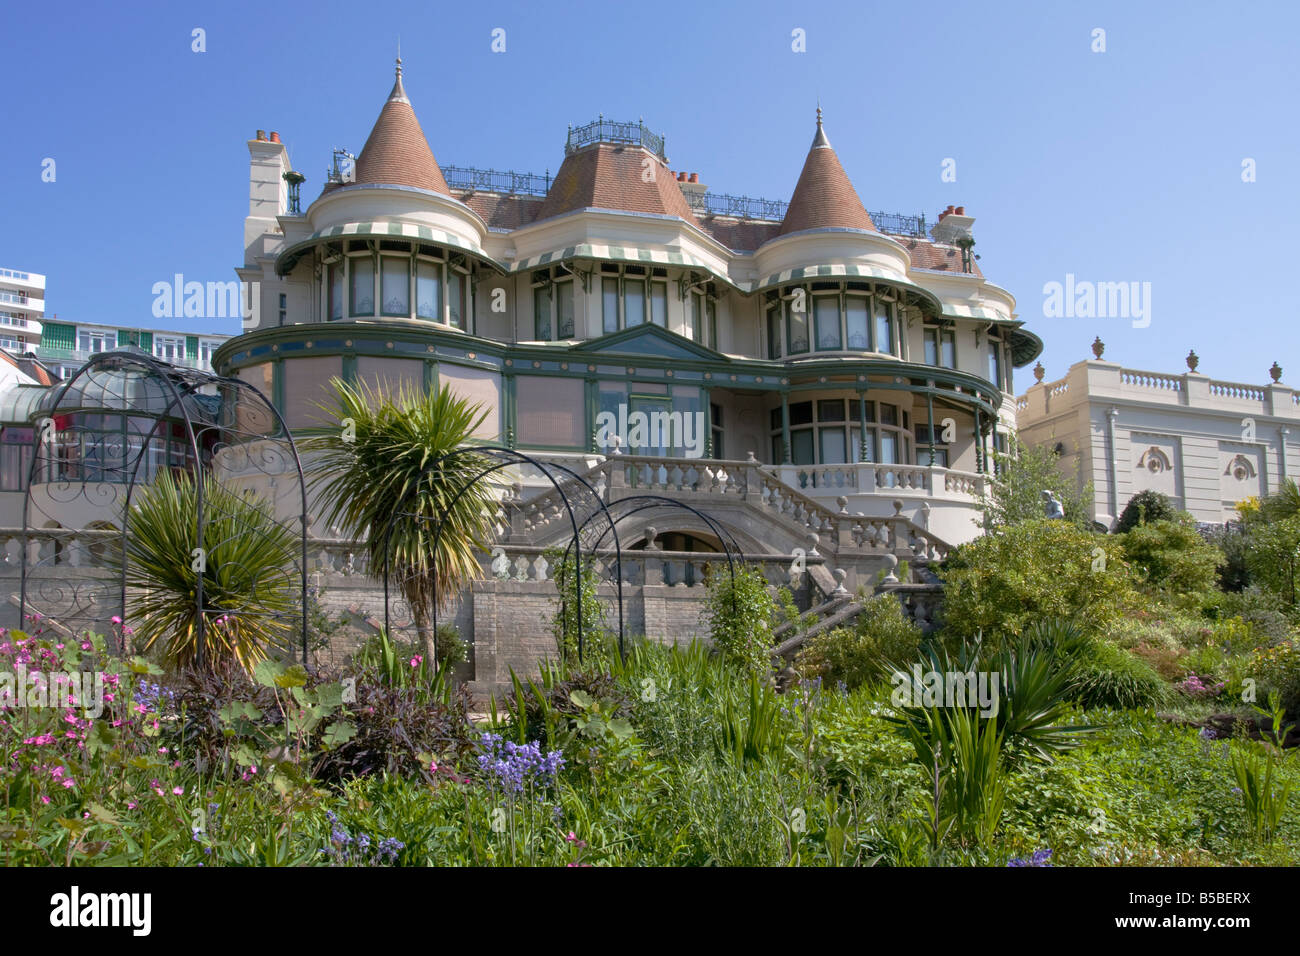 Russell-Cotes Art Gallery & Museum, Bournemouth, Dorset, England, Europe Stock Photo